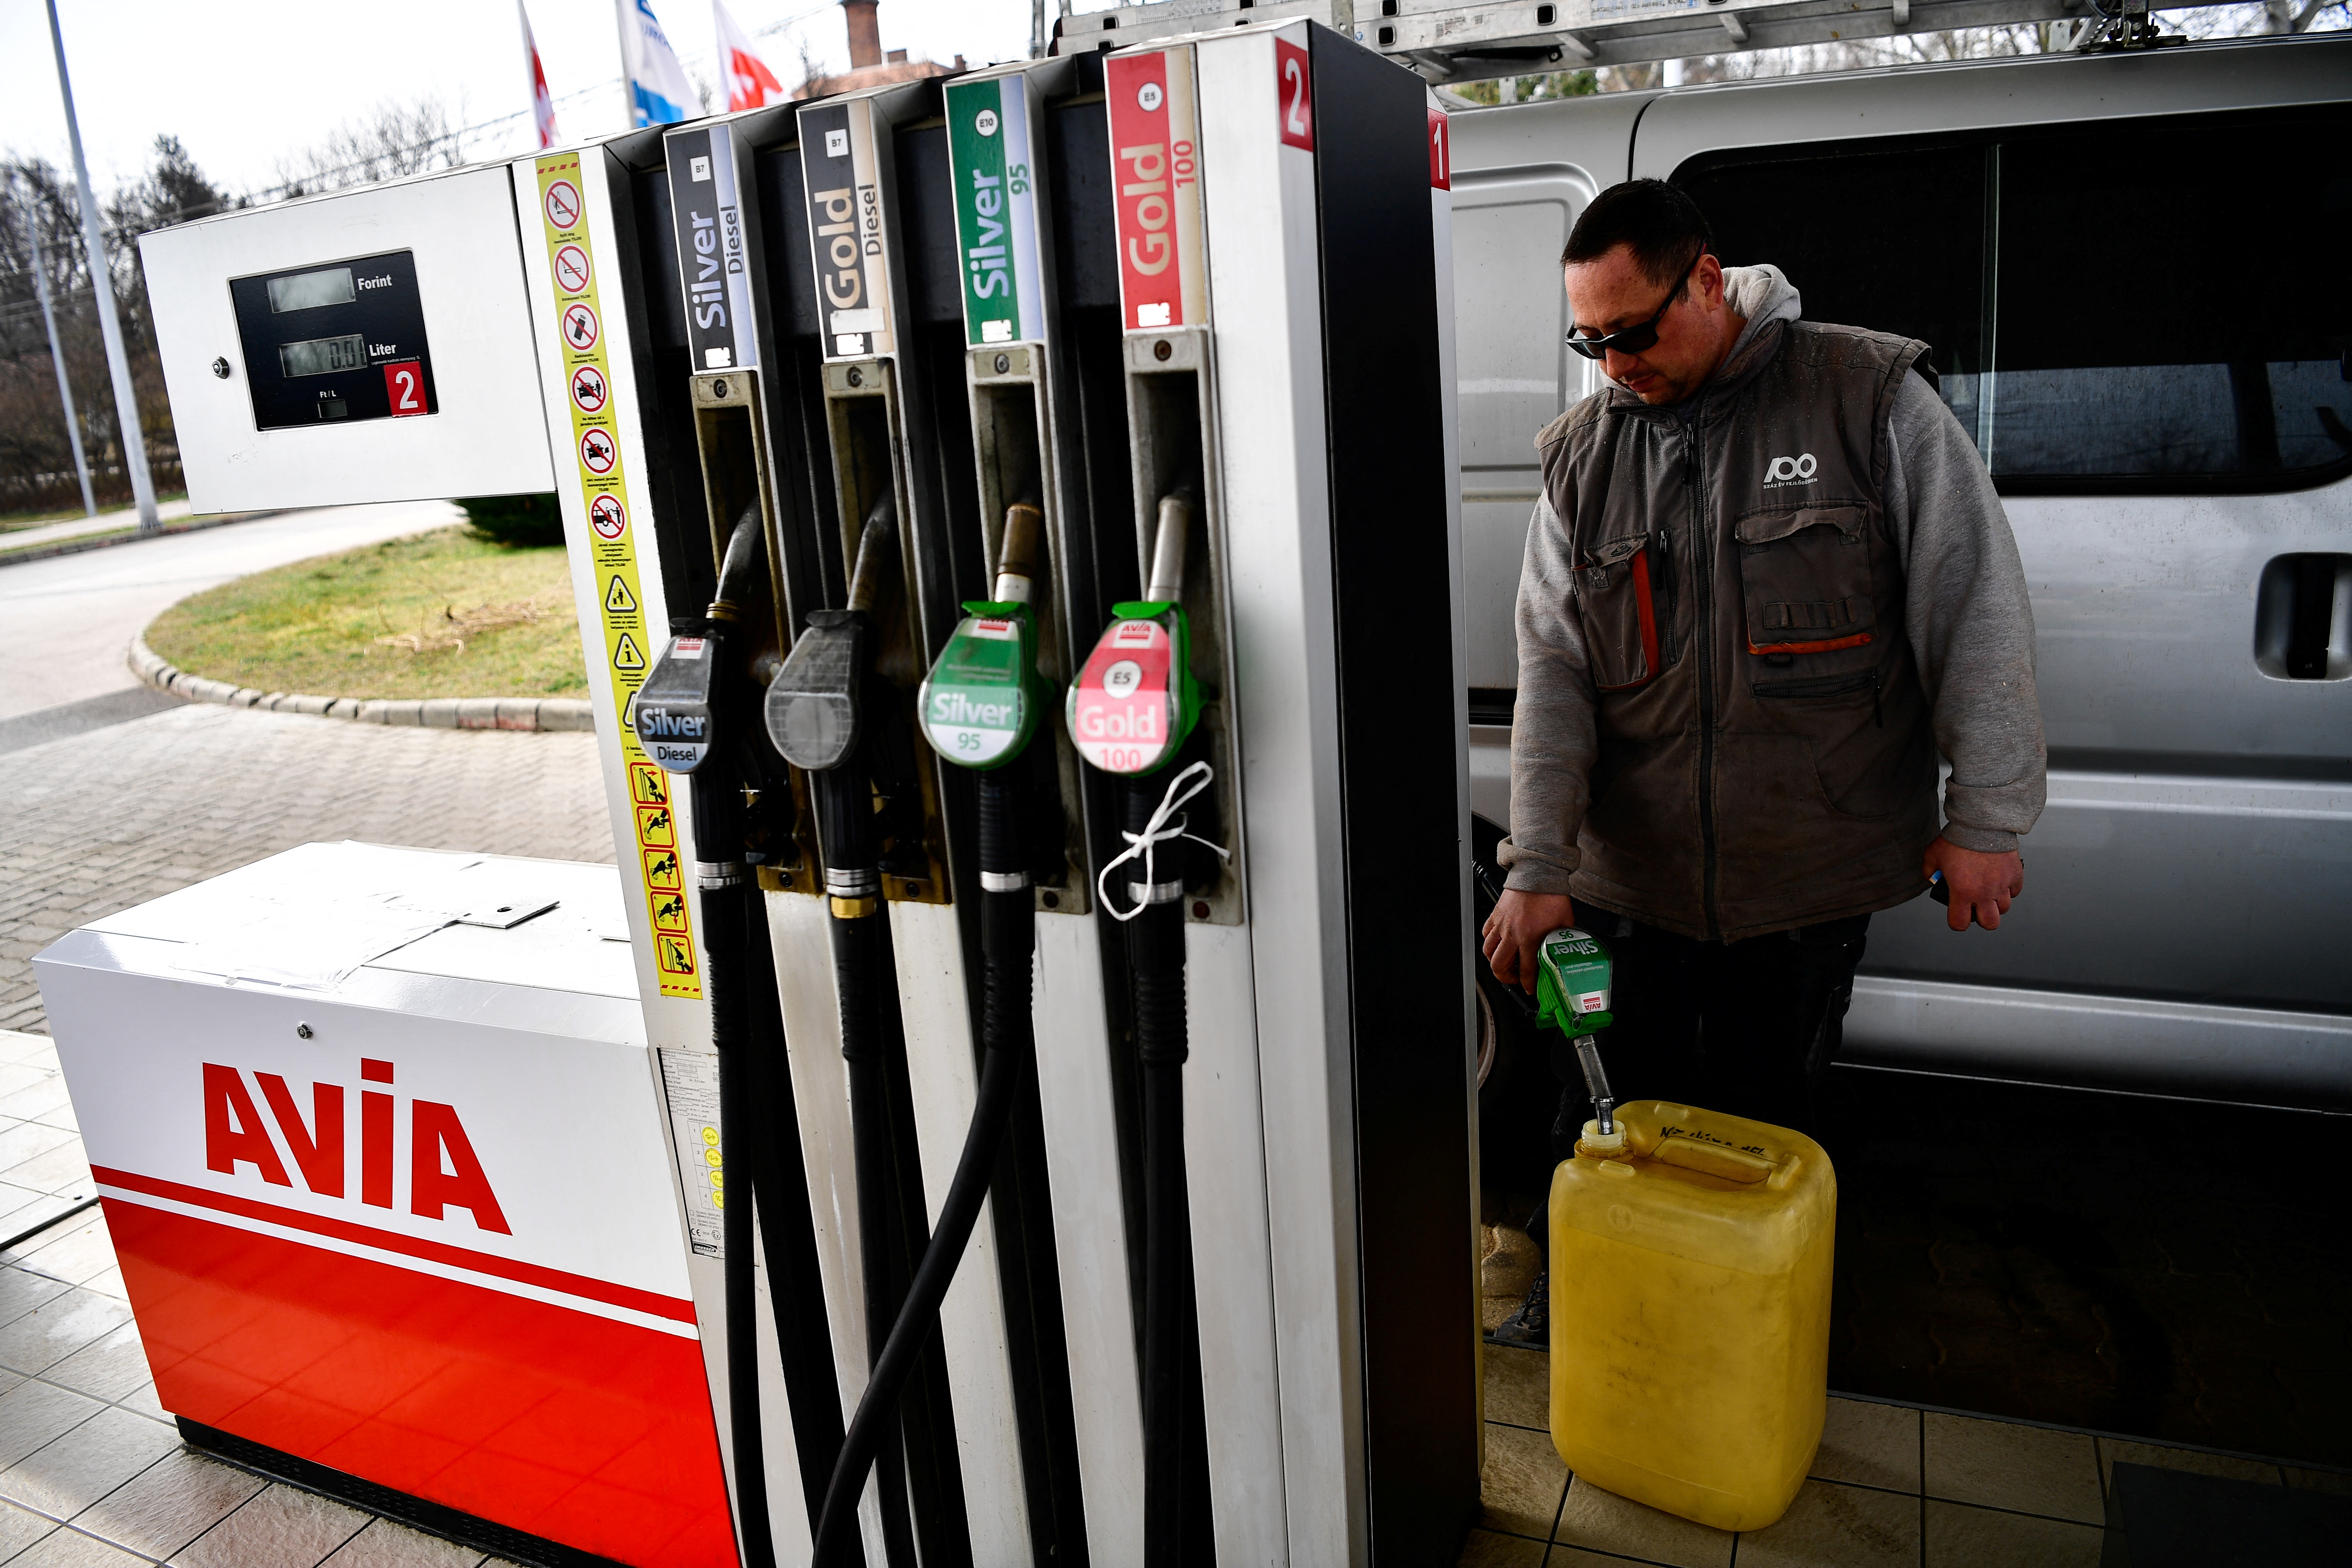 Surge in fuel and energy prices in the wake of Russia's ongoing invasion of Ukraine